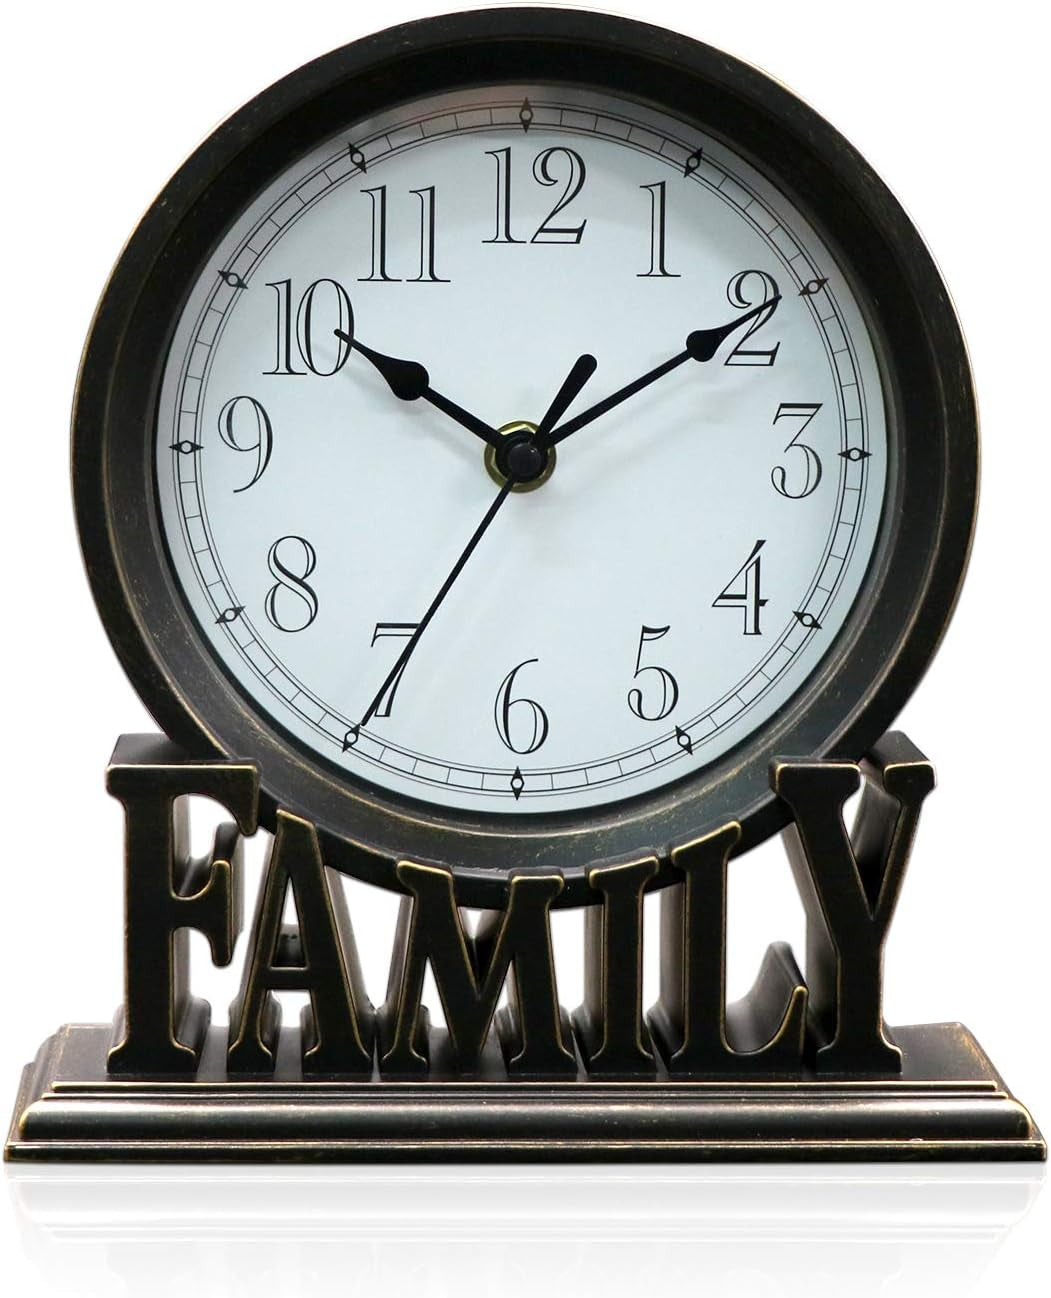 6.5 Inches Table Clock, Vintage Non-Ticking Family Mantel Desk Clock Battery Operated with Quartz Movement HD Glass for Kids Bedroom Living Room Office (Antique Black)